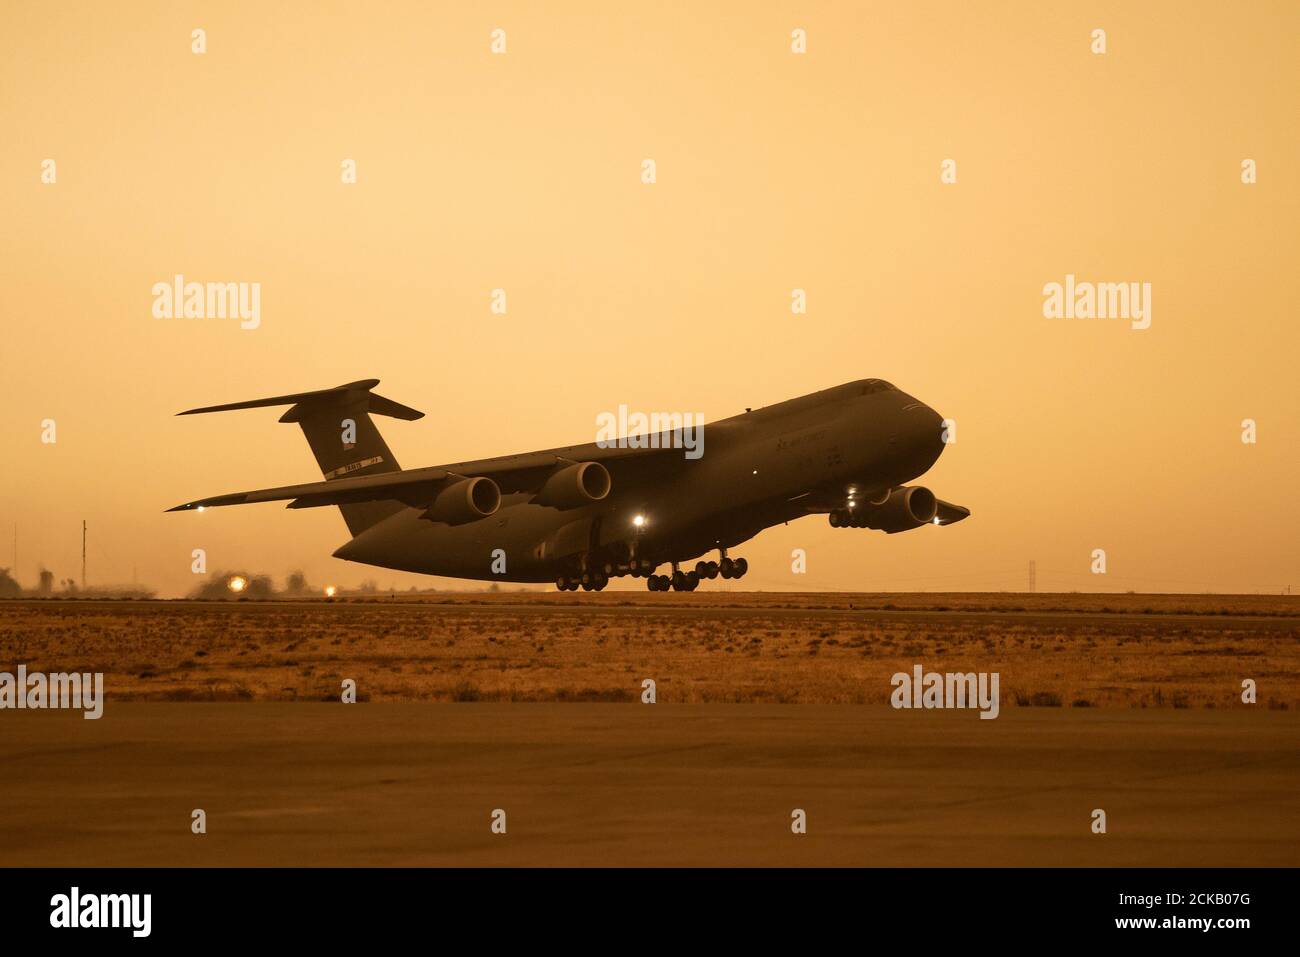 A C-5M Super Galaxy takes off at Travis Air Force Base, California, Sept. 9, 2020. Wildfires across California propelled smoke and ash into the troposphere, impacting air quality. (U.S. Air Force photo by Heide Couch) Stock Photo